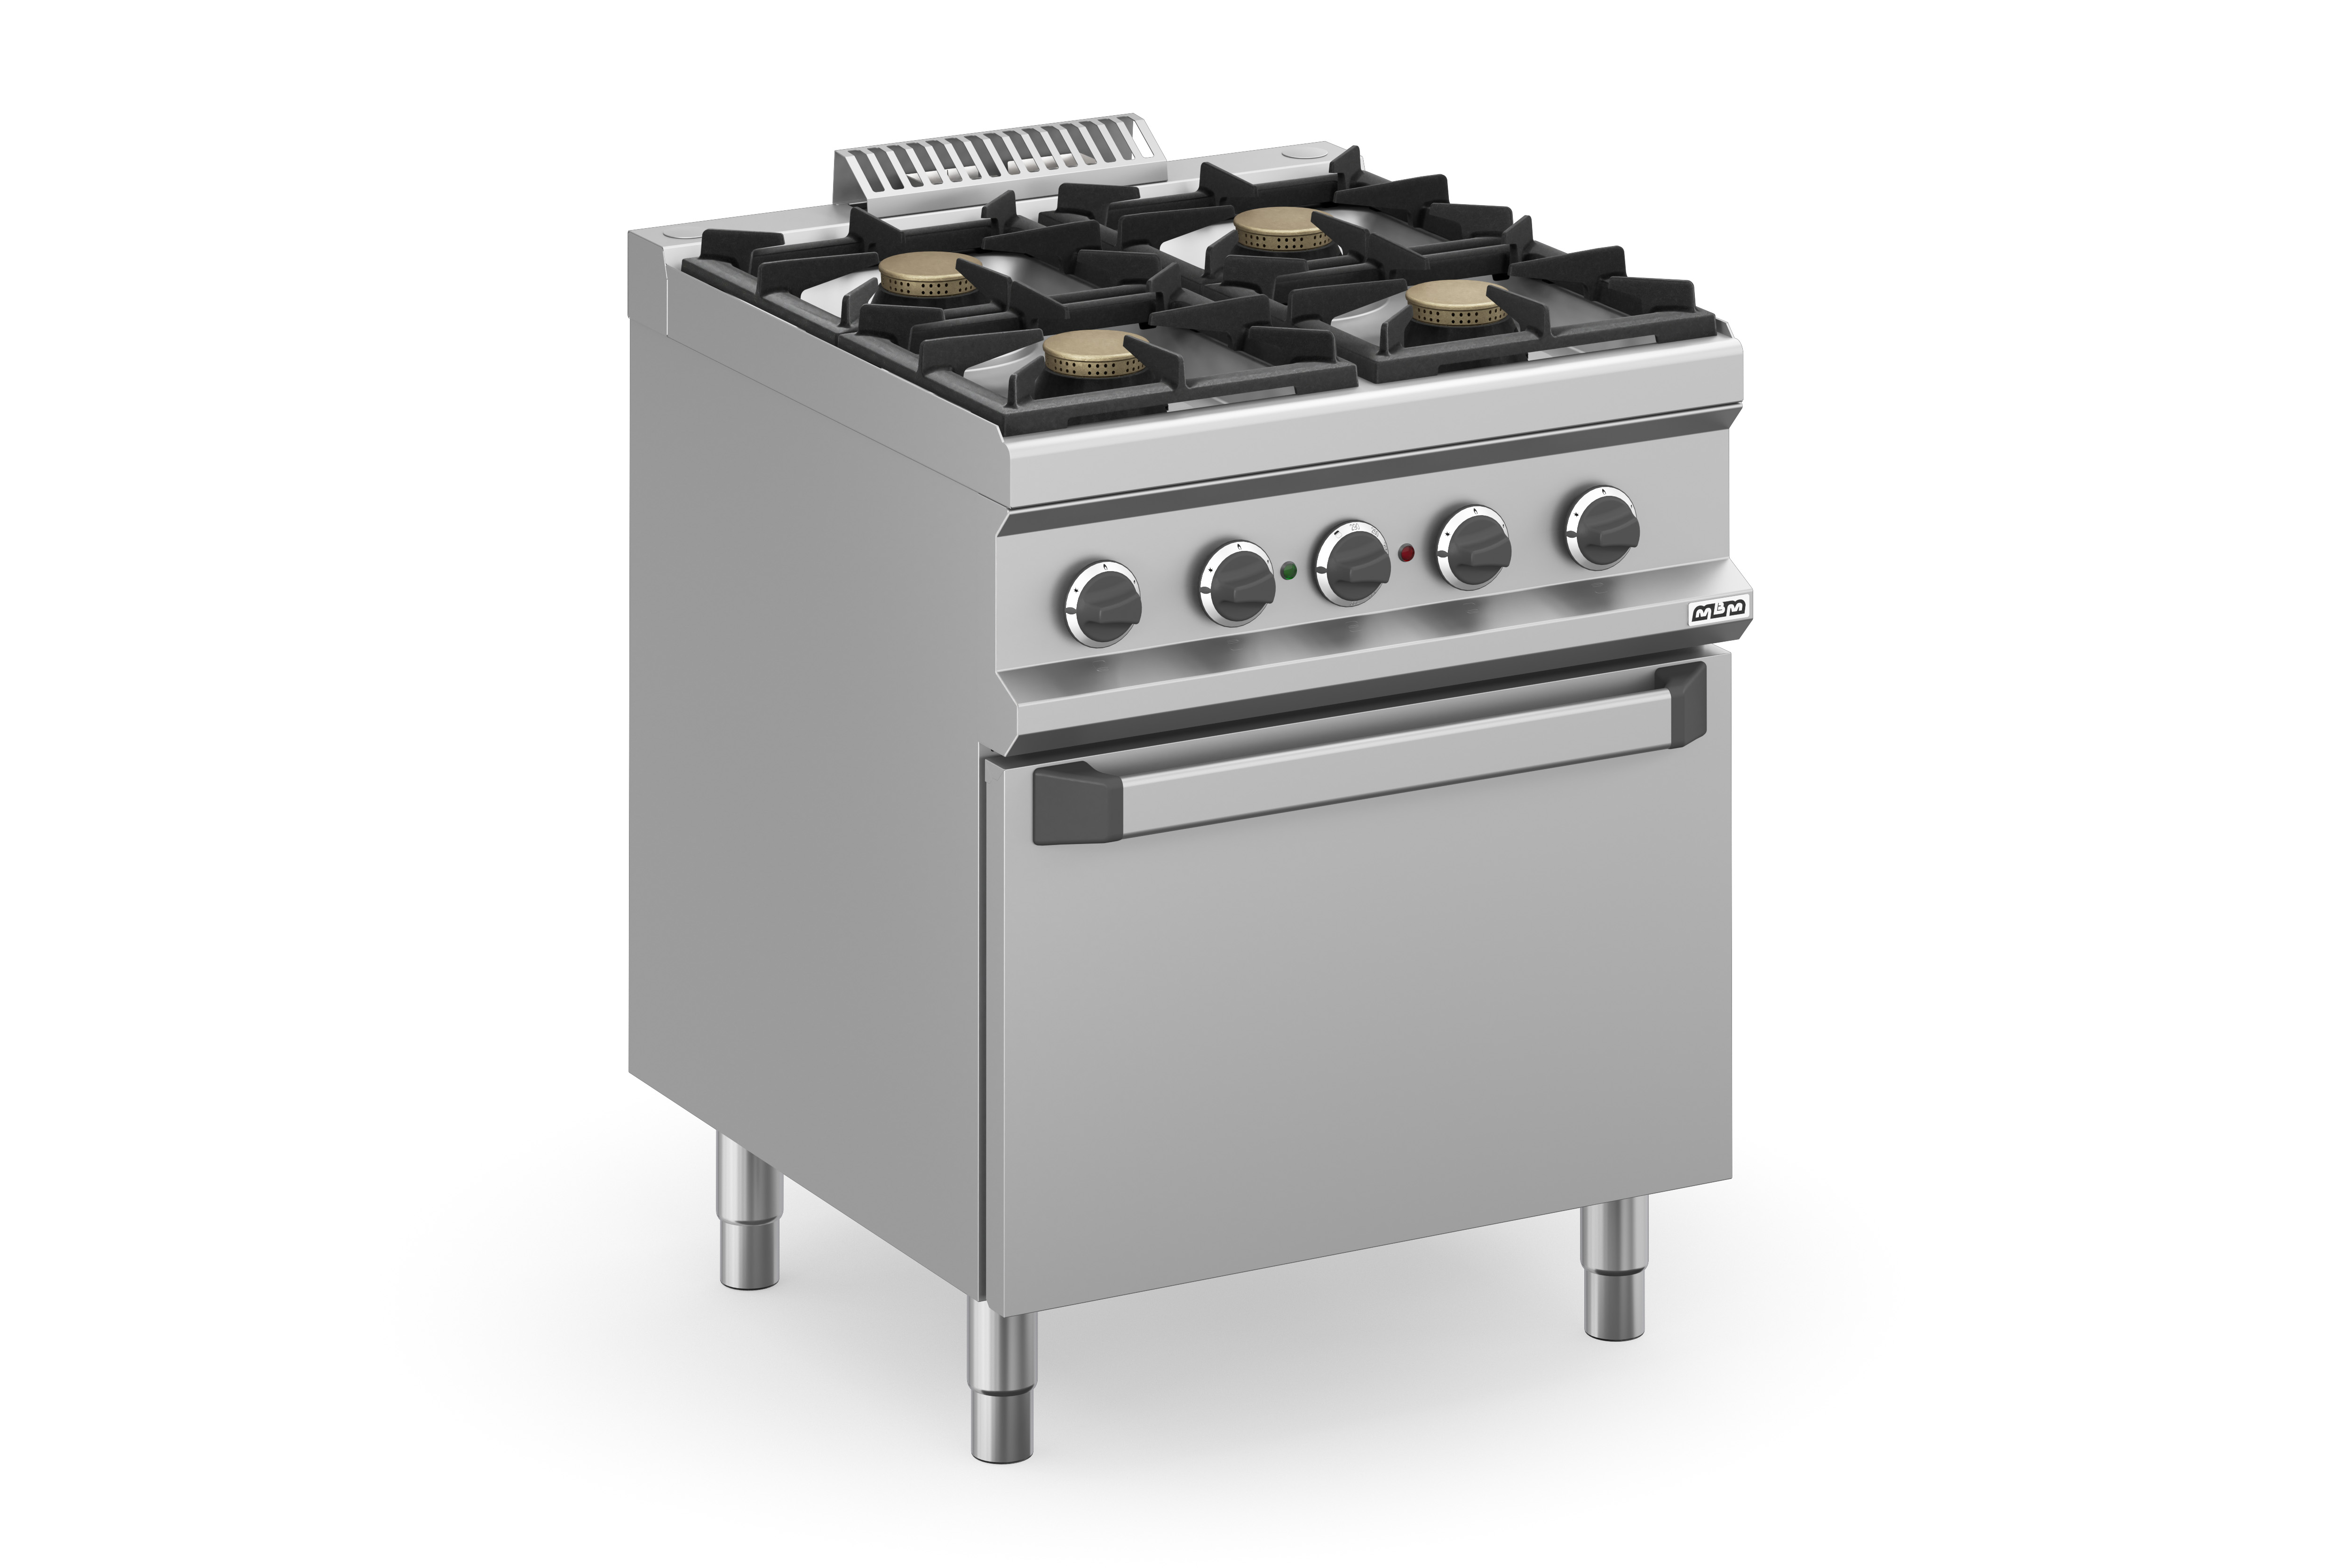 Magistra Plus 700 MFB77FEXS 4 Burners Gas Cooker with Electric Oven